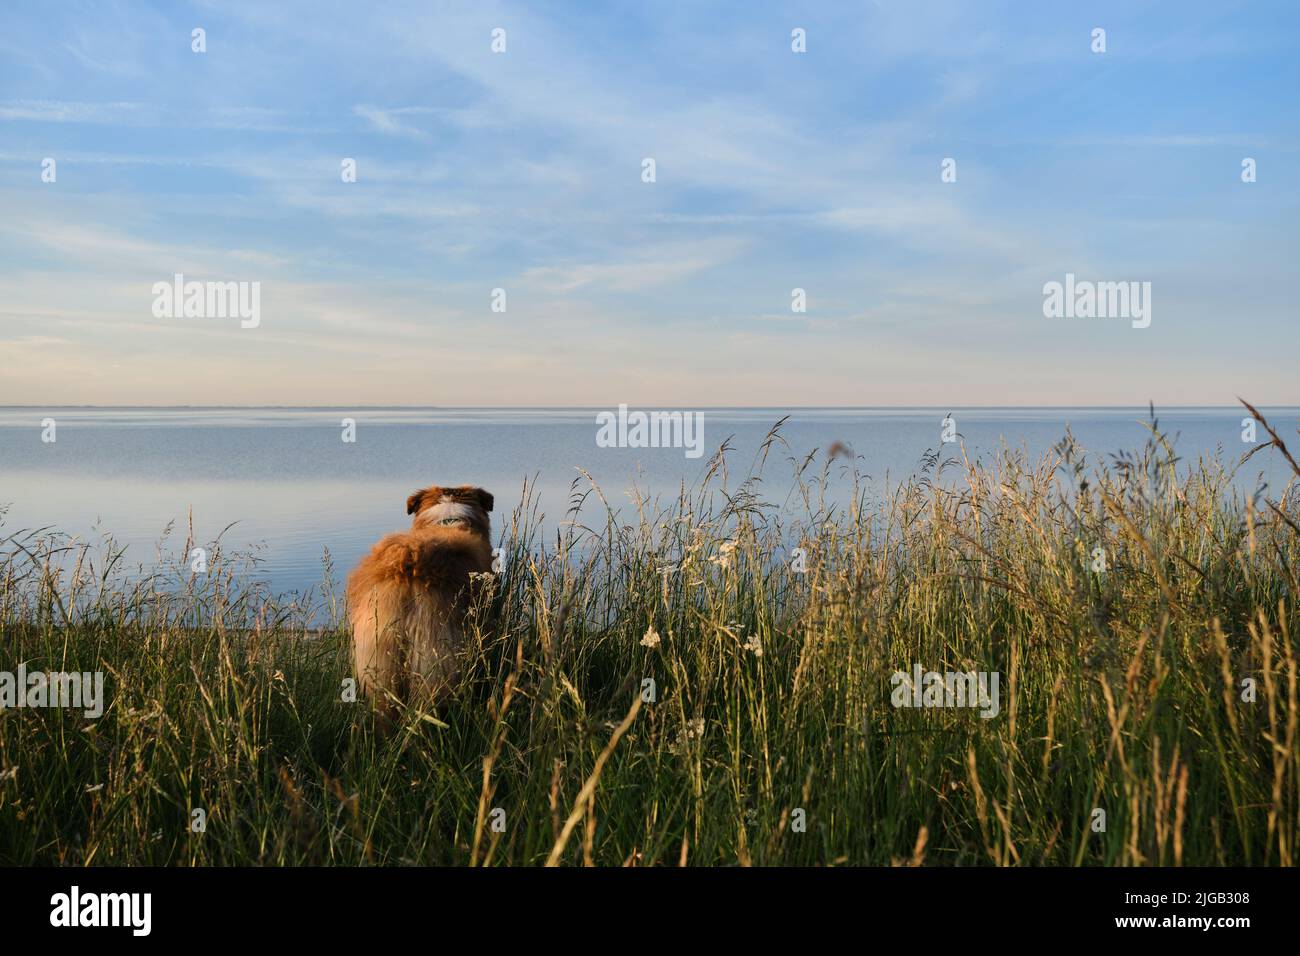 Novgorod region, Russia Lake Ilmen. Young teenage Australian Shepherd puppy stands in tall grass and admires sea or river. Cropped aussie tail, rear v Stock Photo